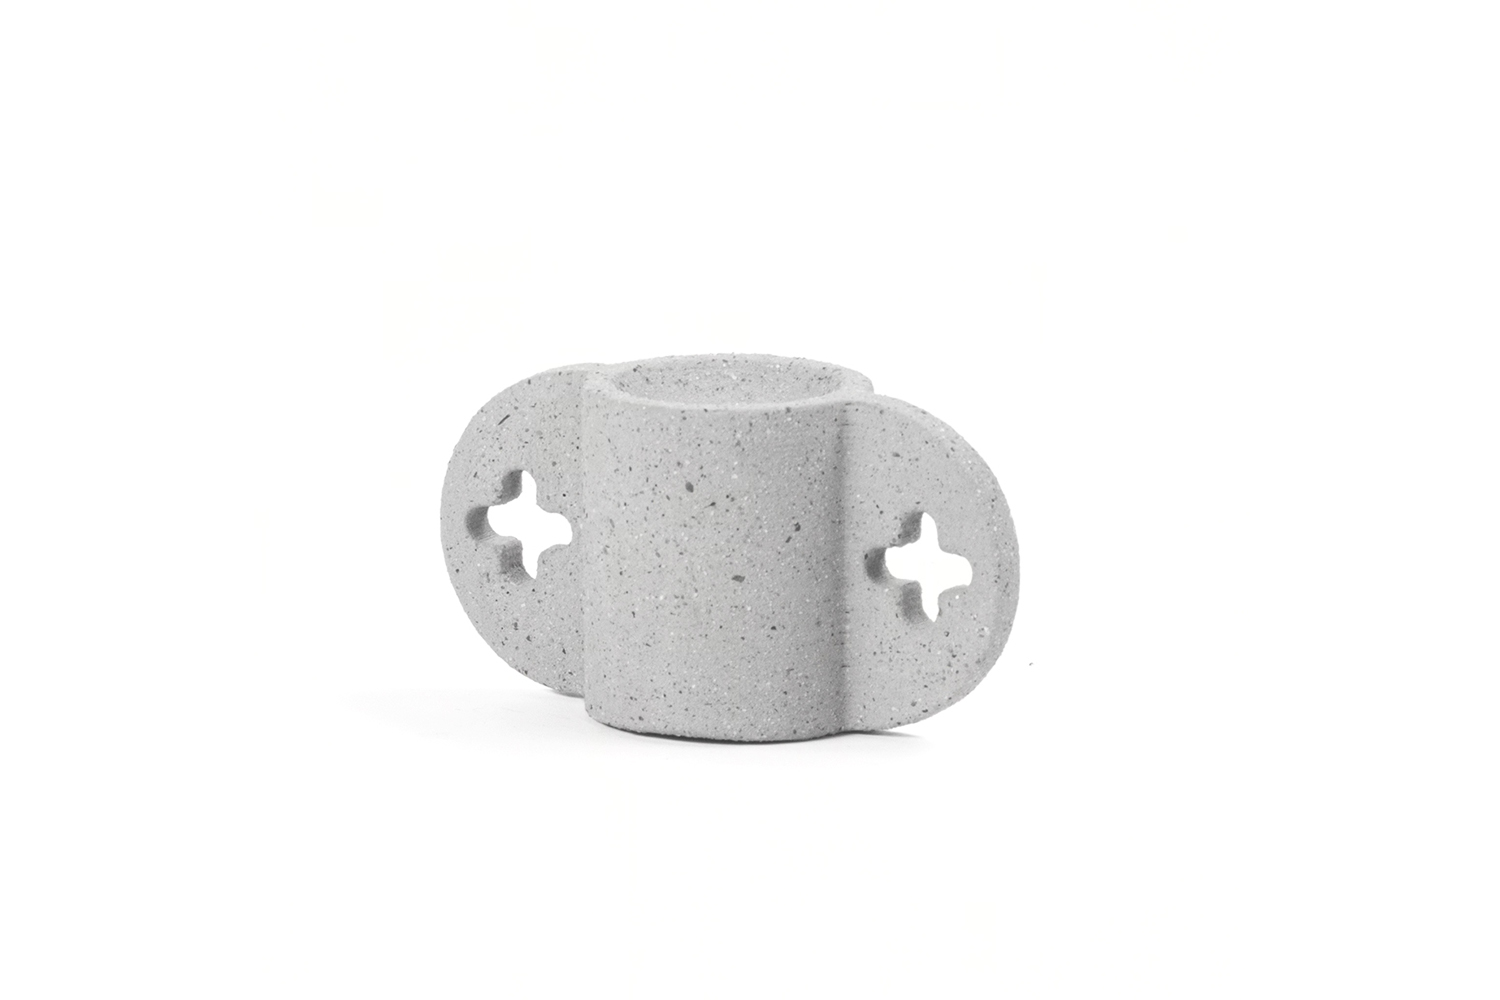 thimiato cement candleholder sideview